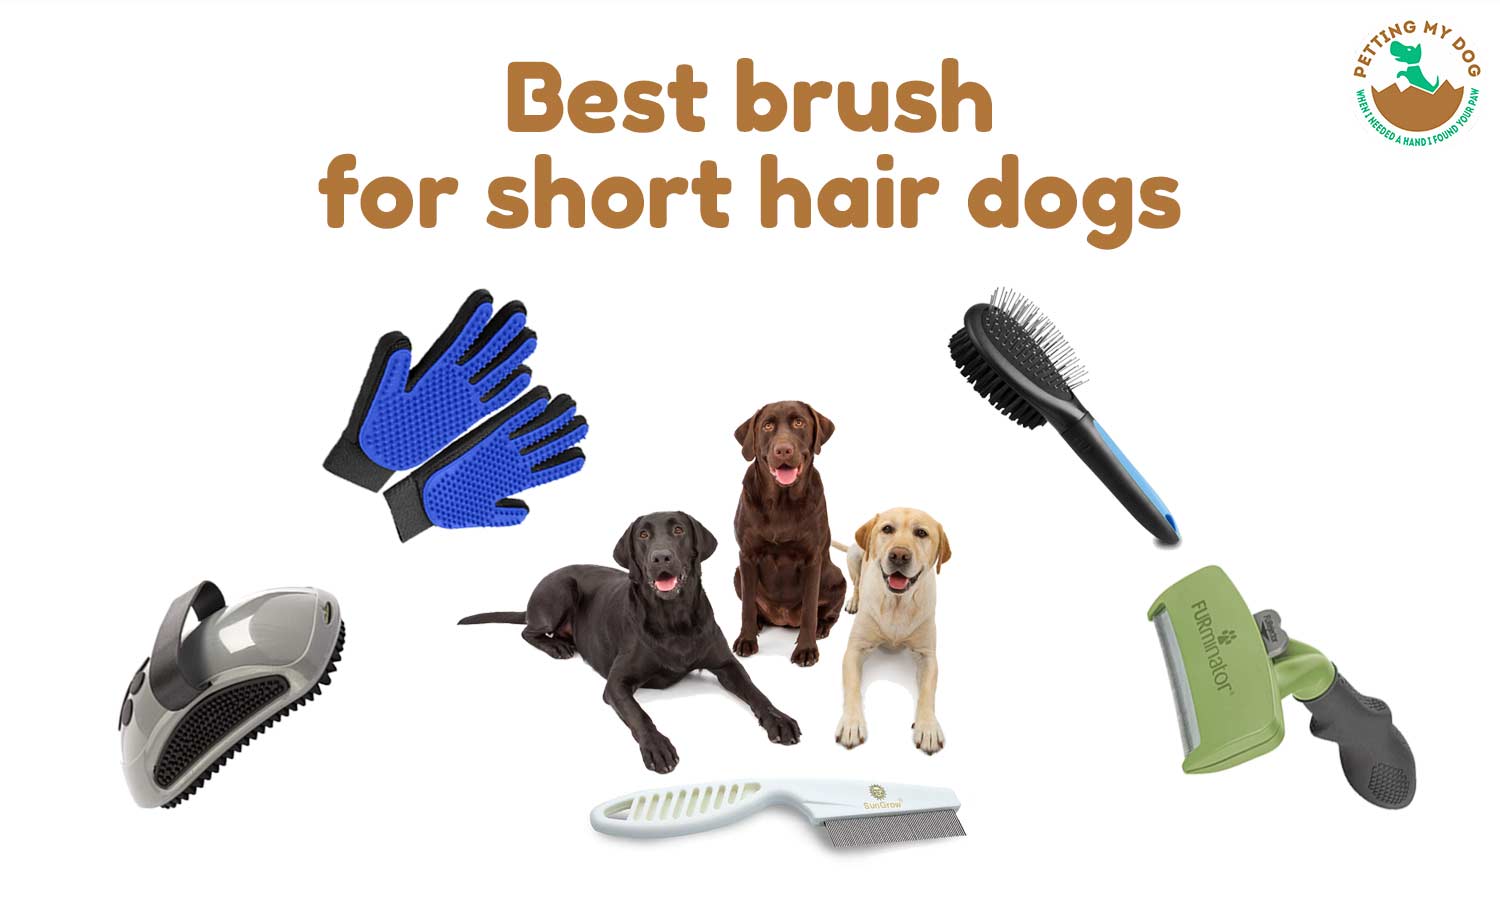 Best Brush For Short Hair Dogs Top 5 Recommended On March 29, 2022